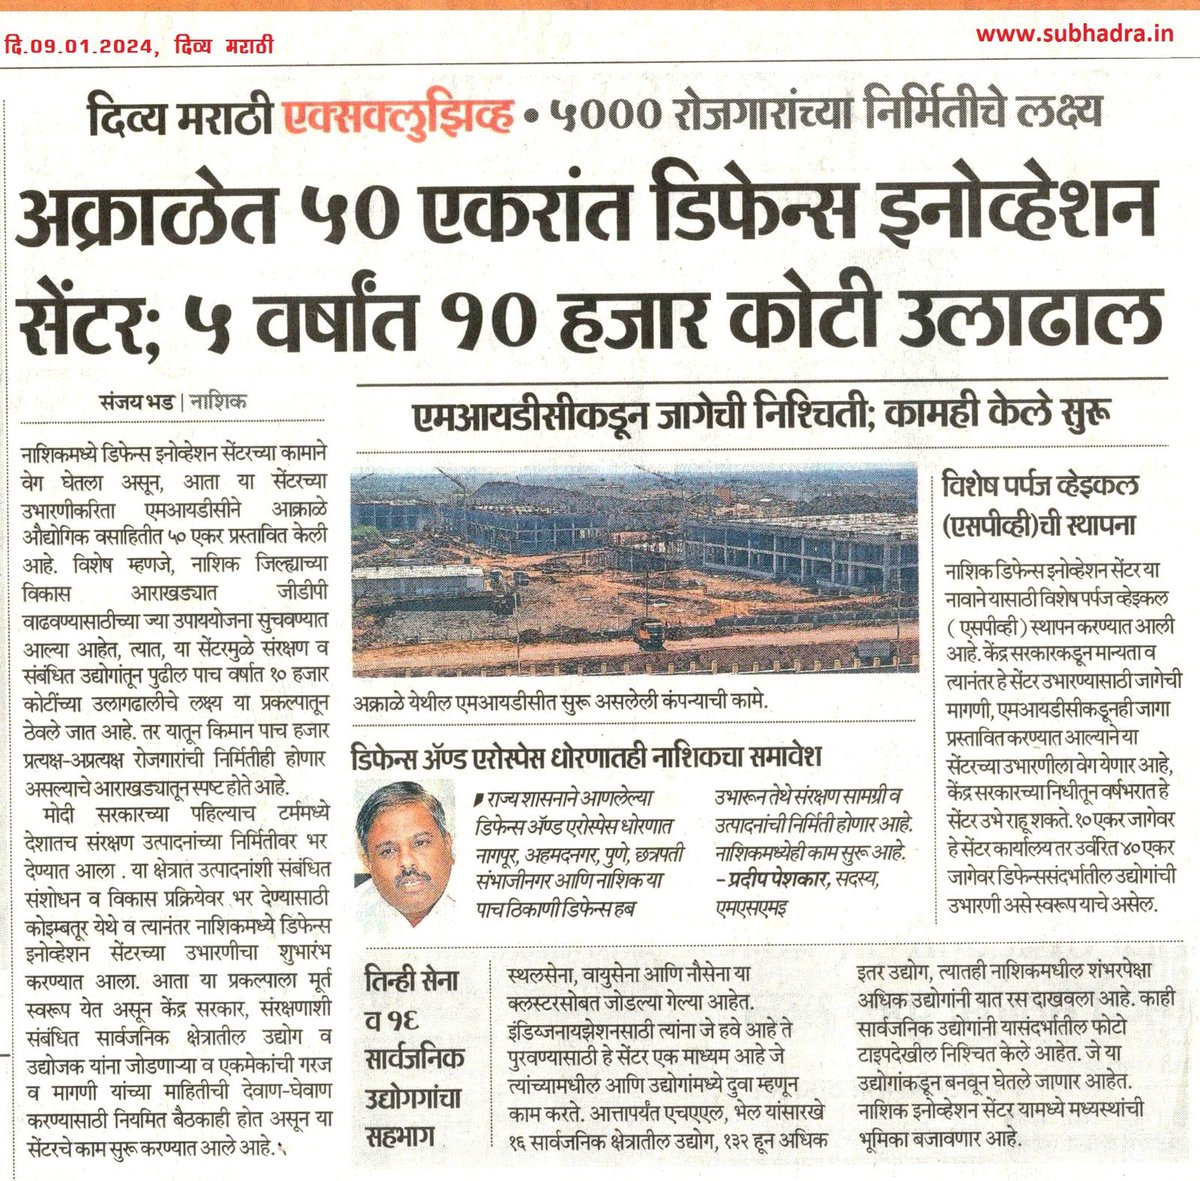 Nashik Defence innovation Center proposed in Nashik. MIDC proposes 50 acre land in Akrale MIDC industrial estate, near Dindori, Nashik. 
Rs 10,000 crore investment proposed and employment to over 5000 people targeted.  

#nashik #DefenceInnovation #employment #midc #industry